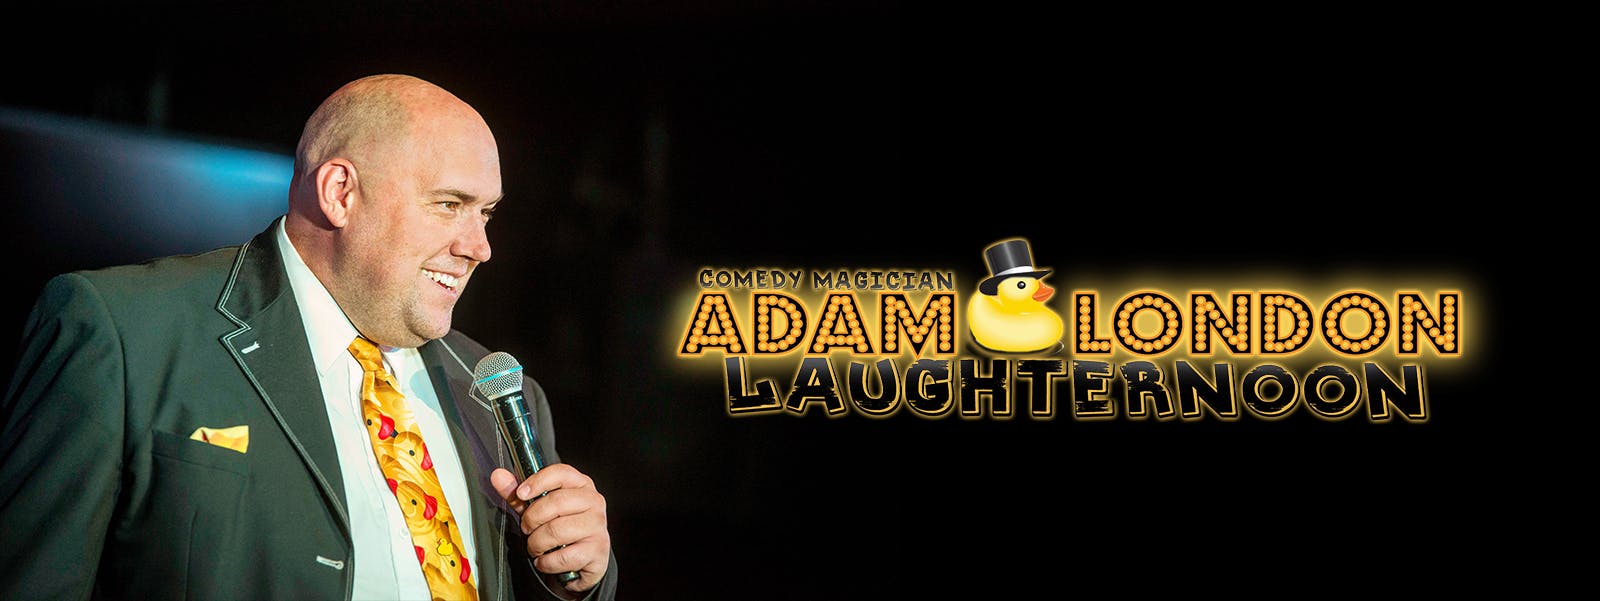 Tickets to Adam London's Laughternoon